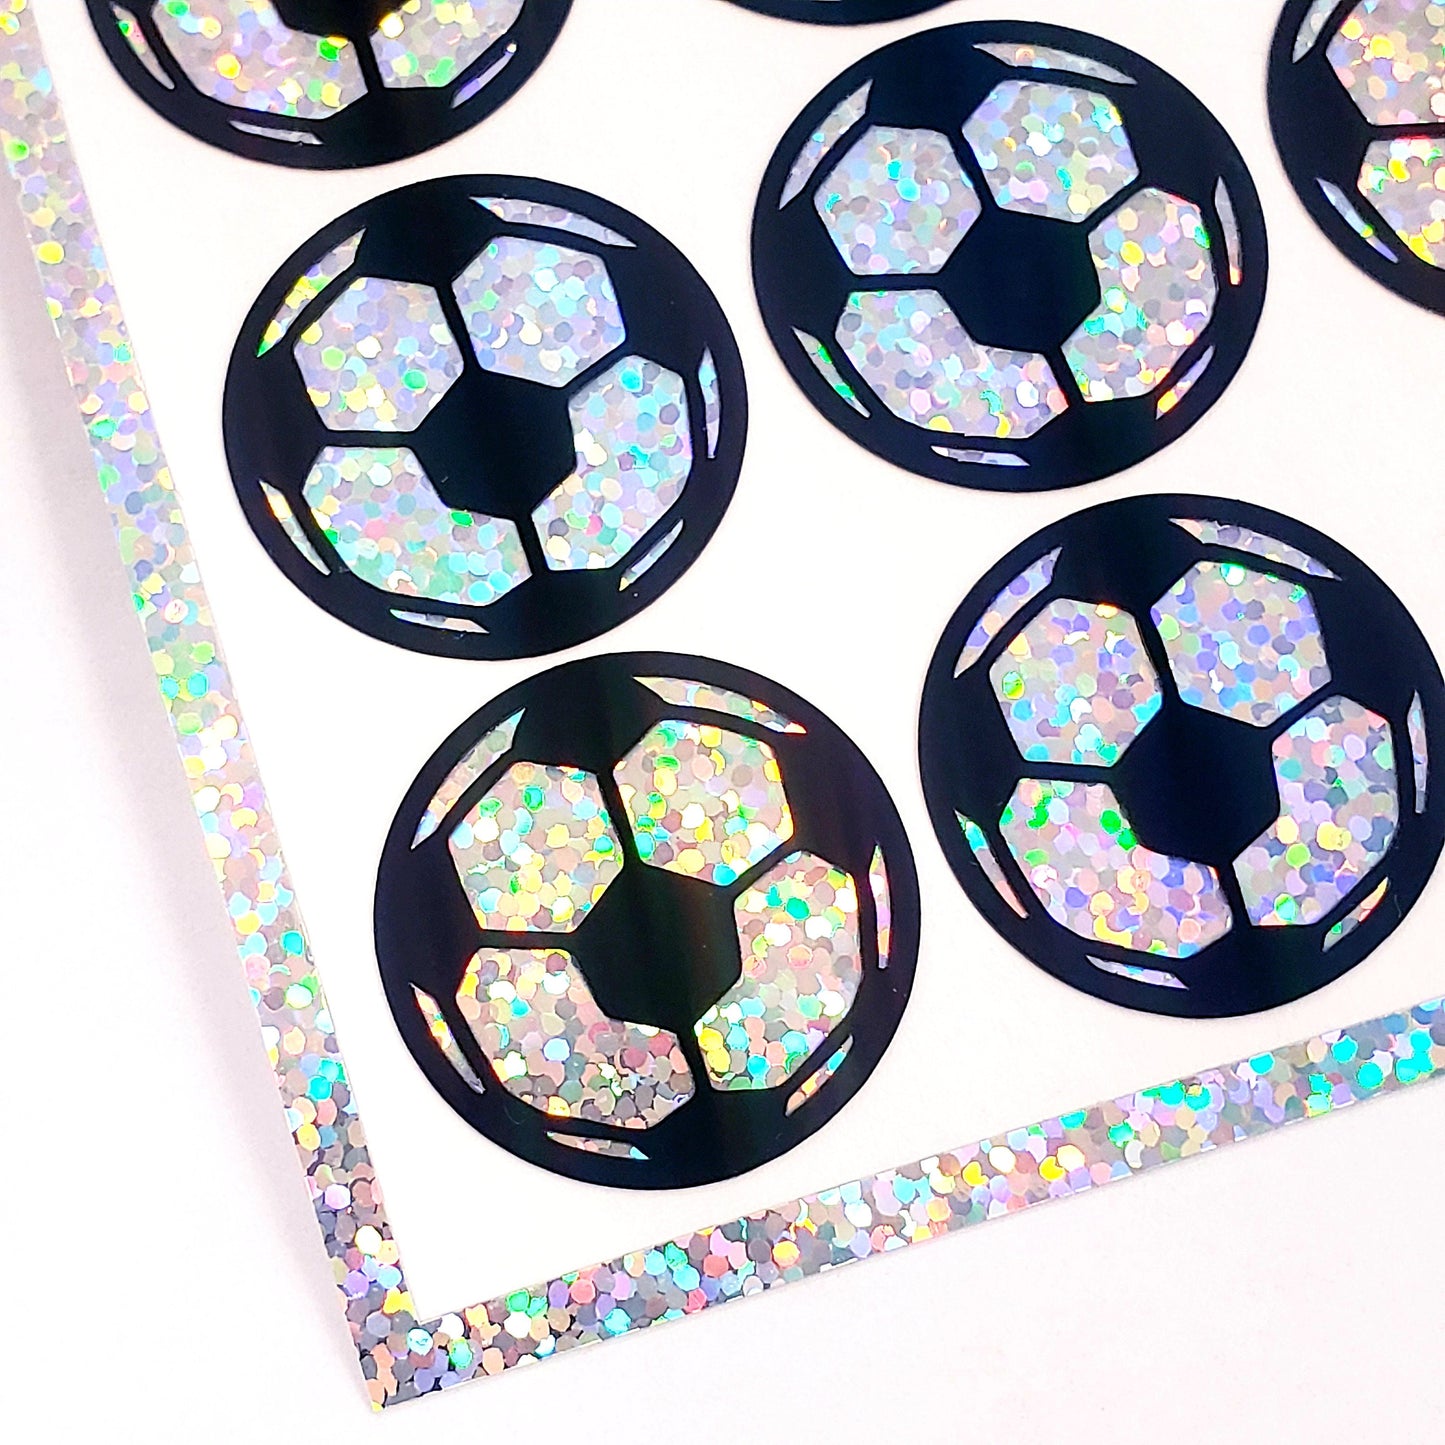 Soccer ball Stickers, set of 48 black and silver glitter stickers for kids sports, soccer birthday party decor, waterproof handmade stickers